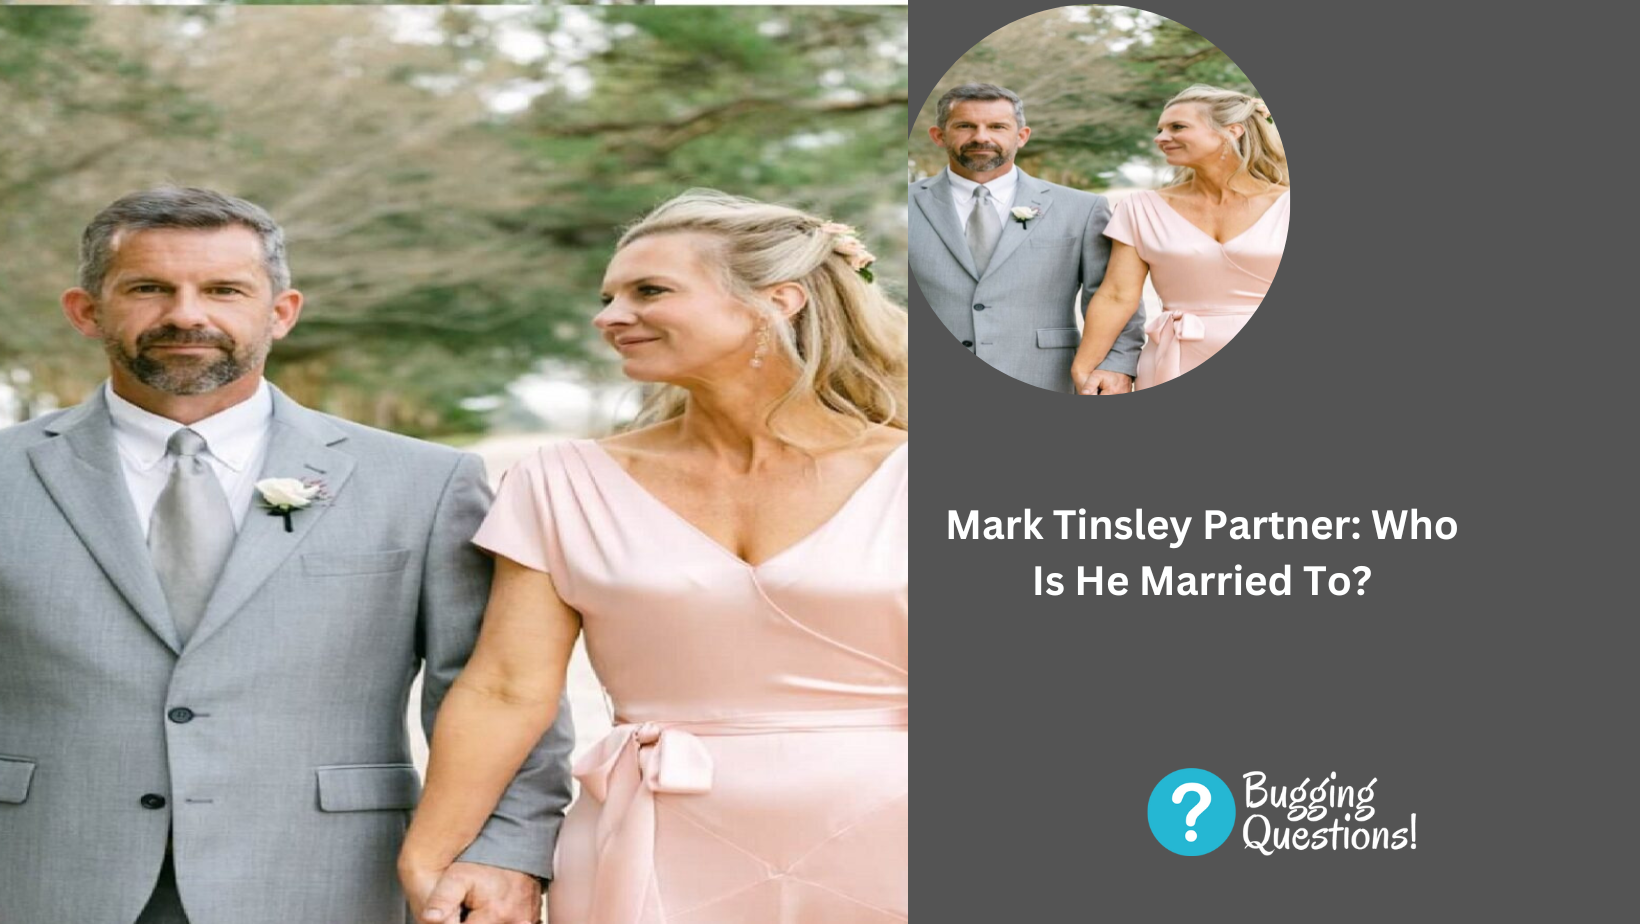 Mark Tinsley Partner: Who Is He Married To?